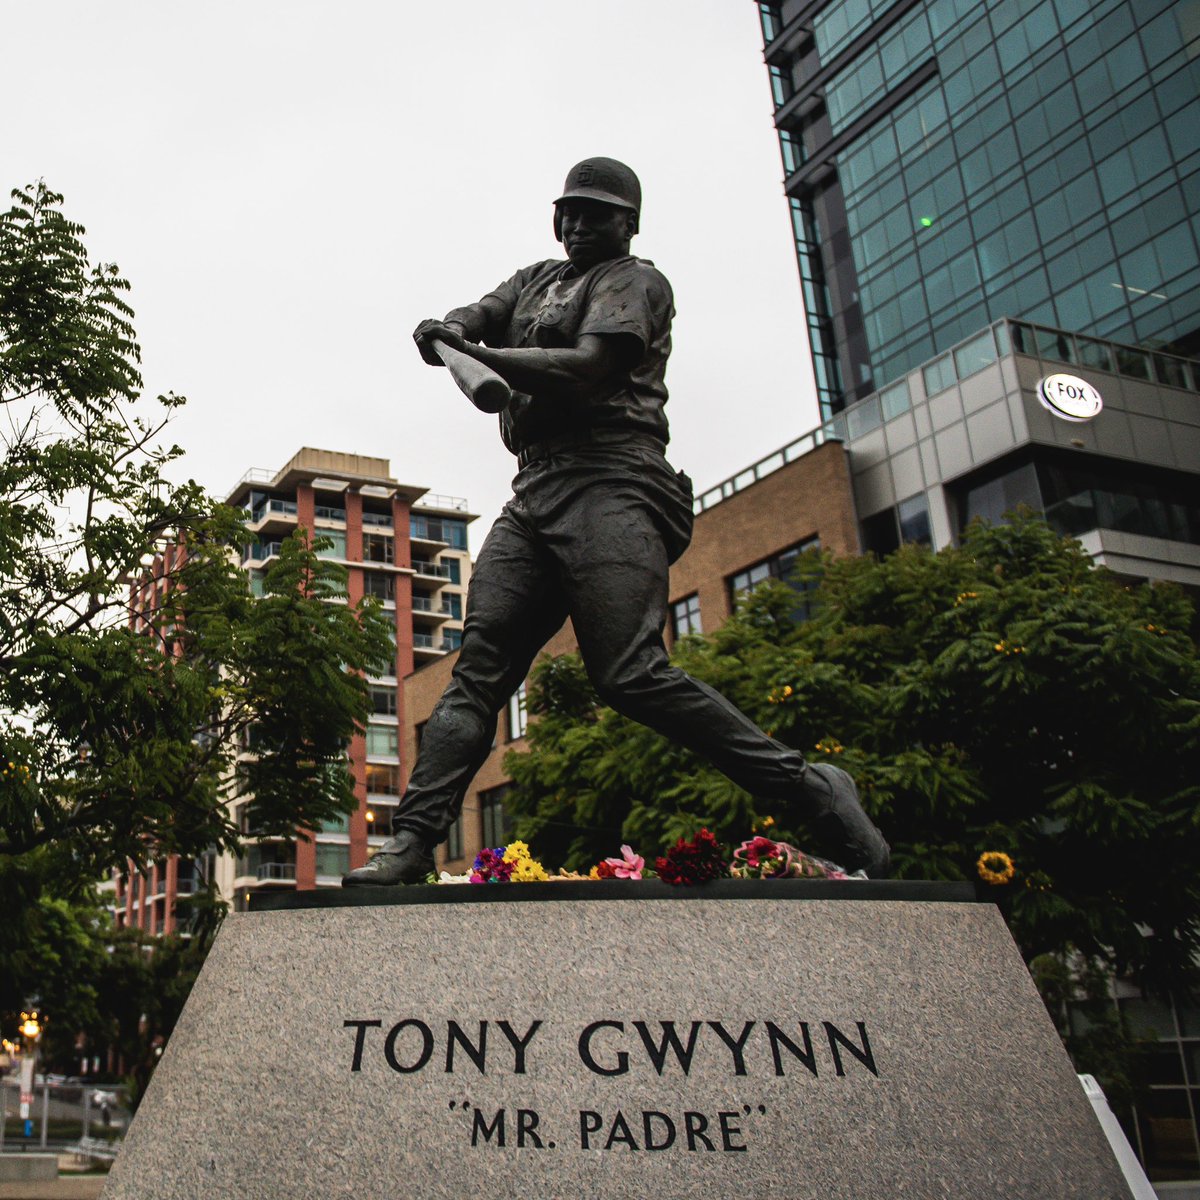 Nine years ago, we lost our beloved Tony Gwynn. Not a day goes by that we don’t miss you, #MrPadre! #19 forever in our hearts 🤎💛